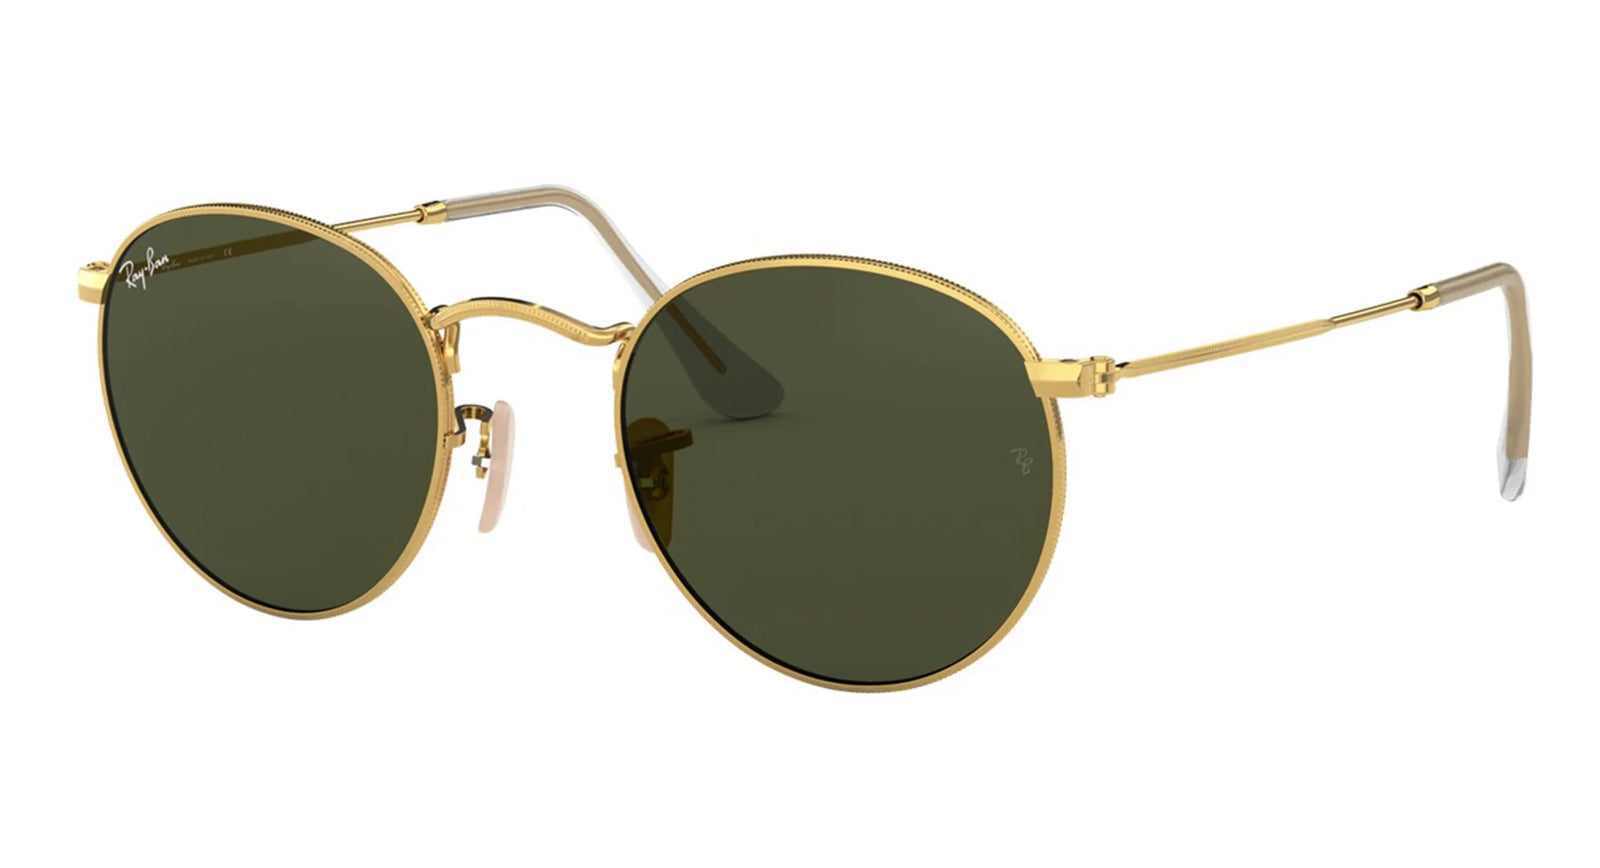 Ray-Ban Round Metal Adult Lifestyle Sunglasses